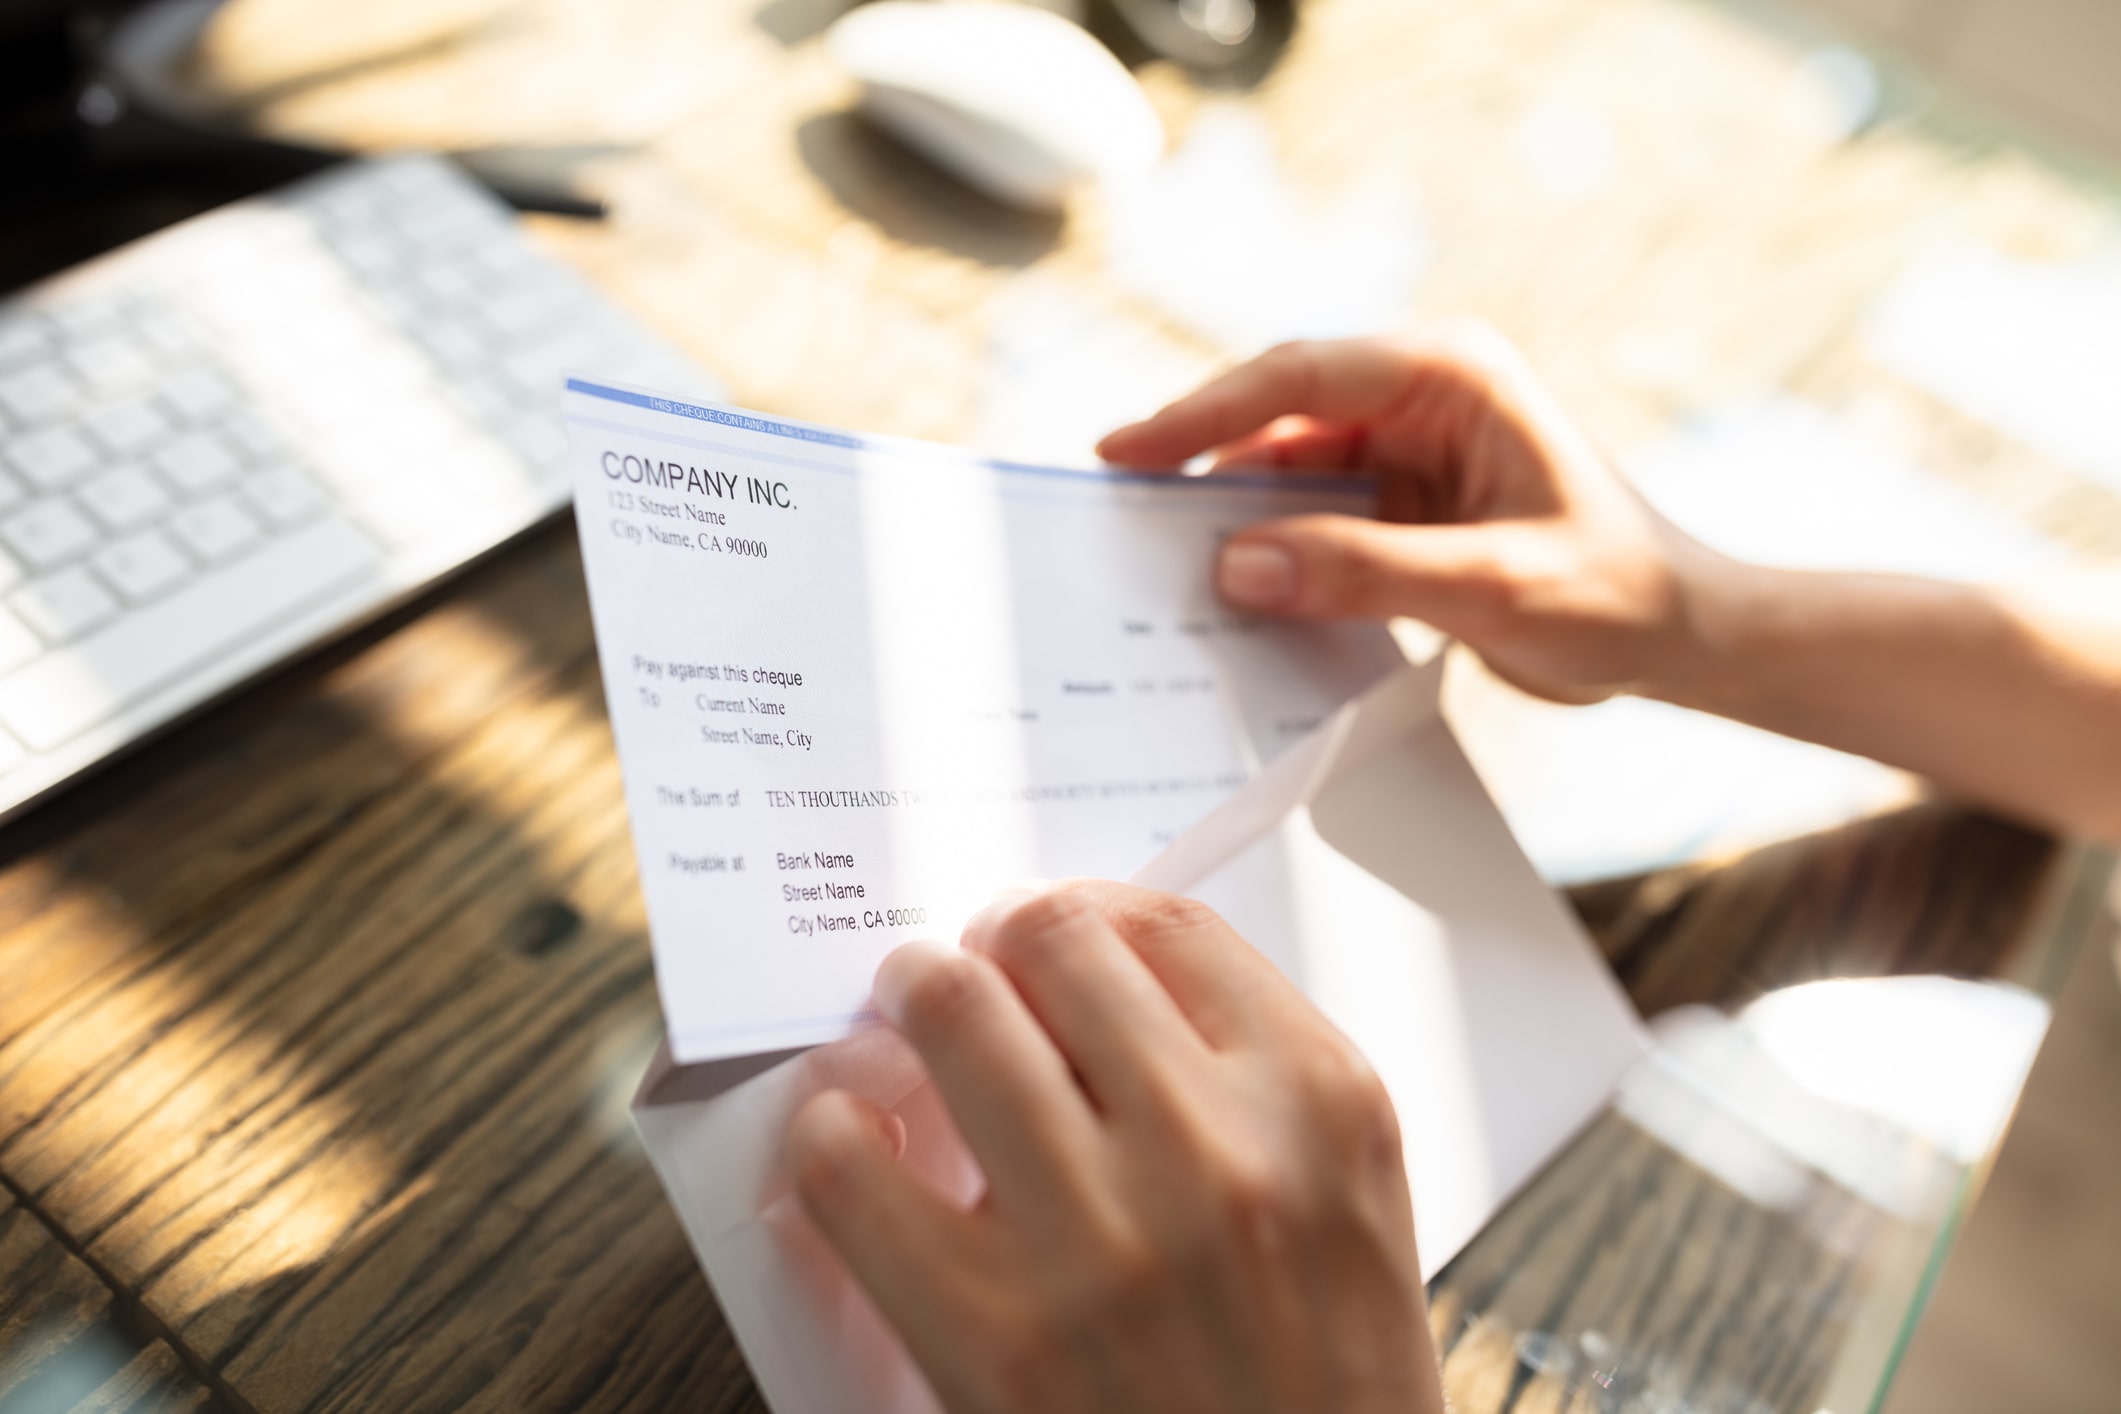 One in four UK workers don't check their payslips regularly